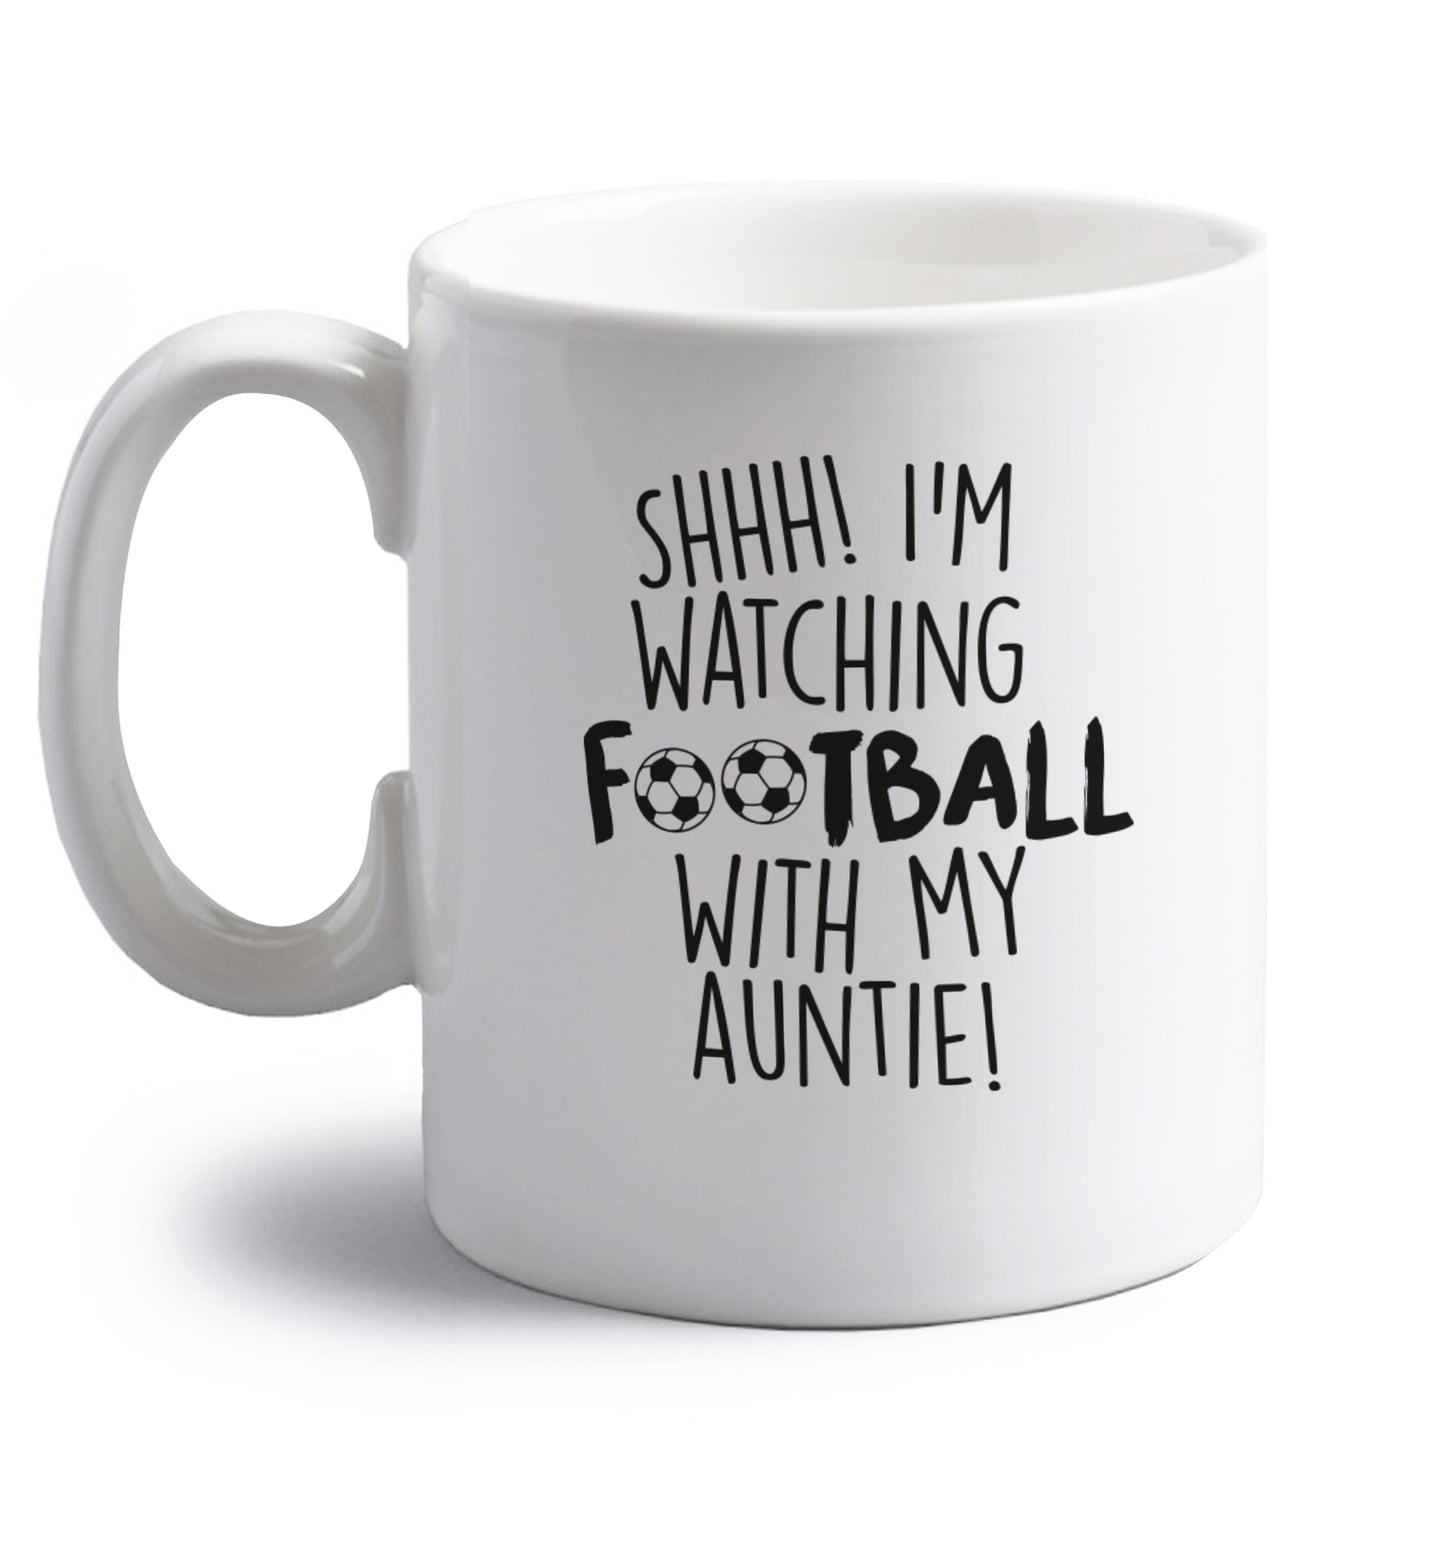 Shhh I'm watching football with my auntie right handed white ceramic mug 